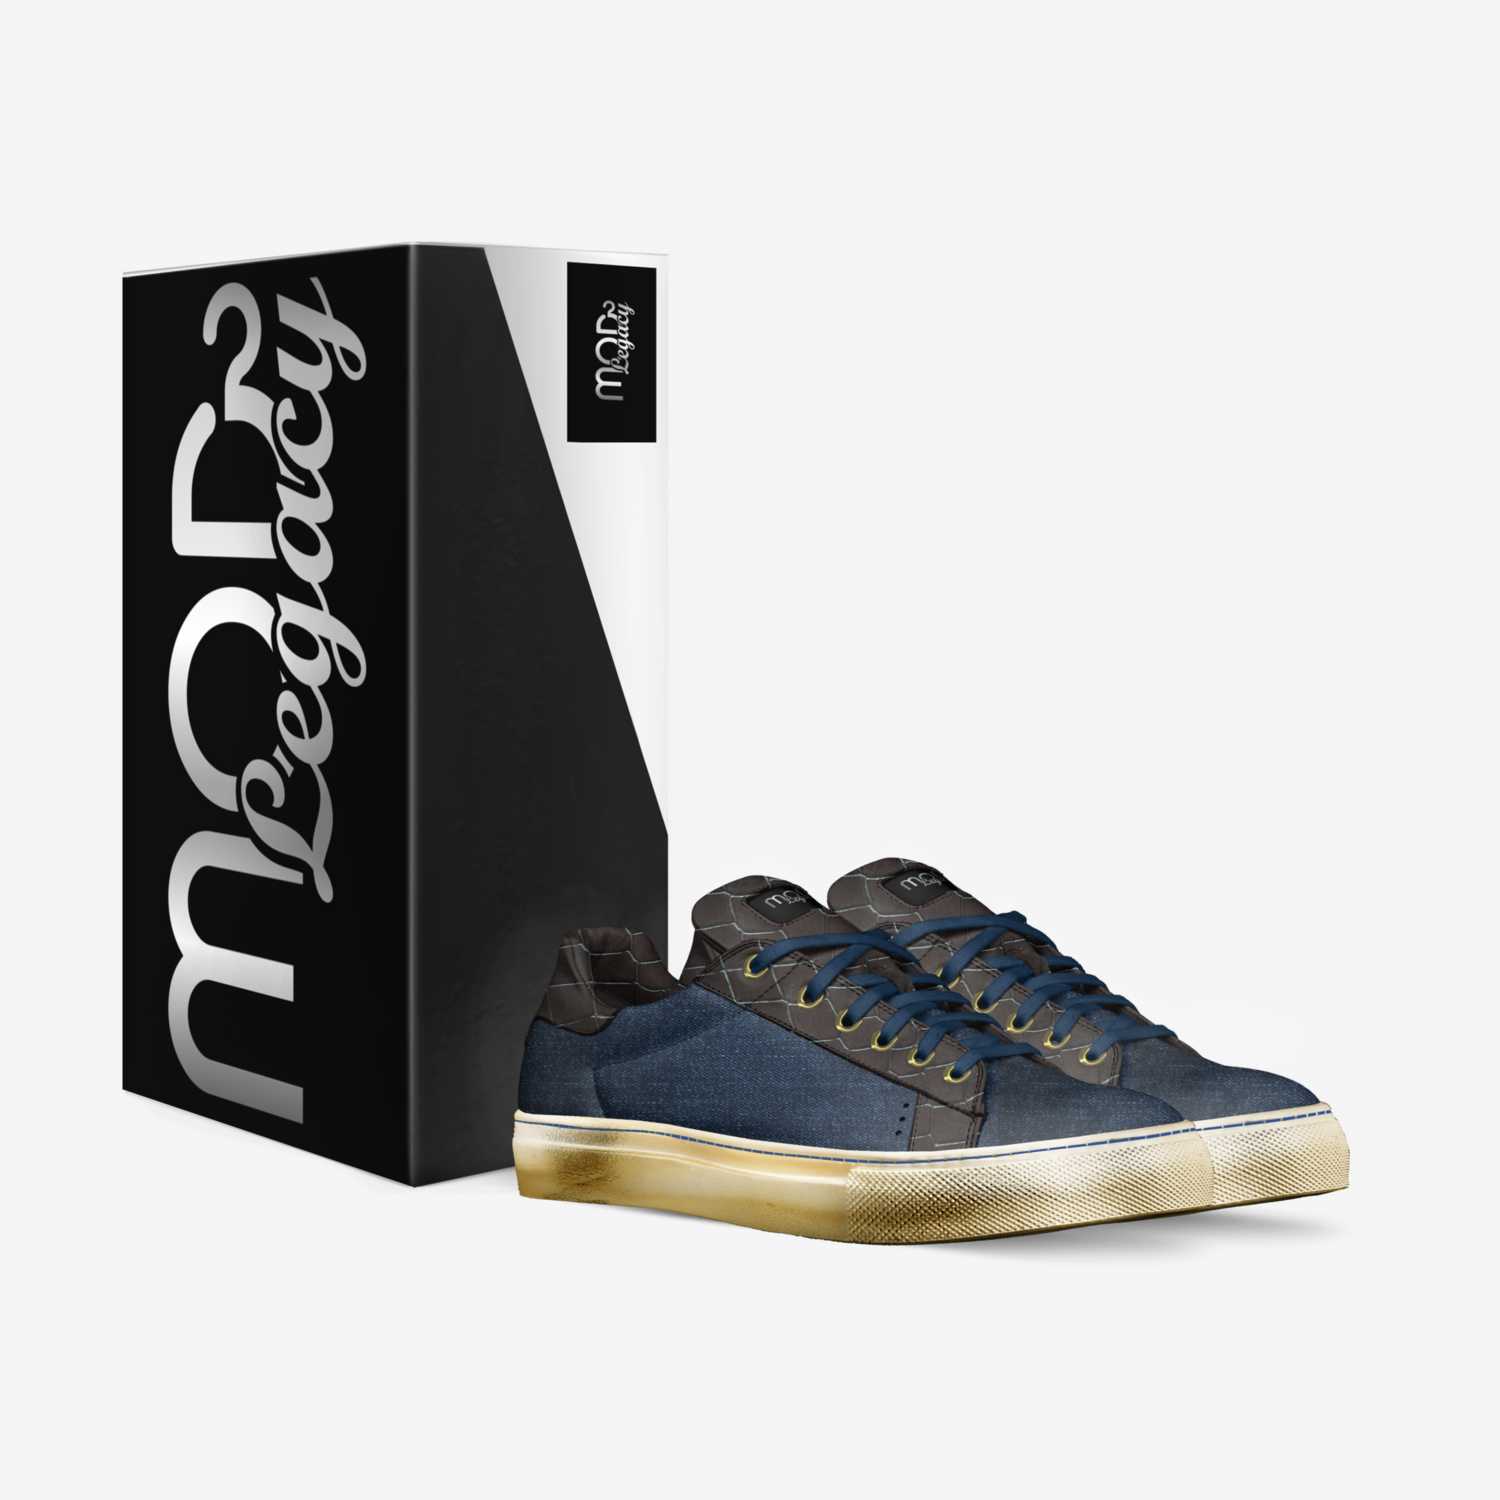 MOD LEGACY custom made in Italy shoes by Blake Alexandros | Box view